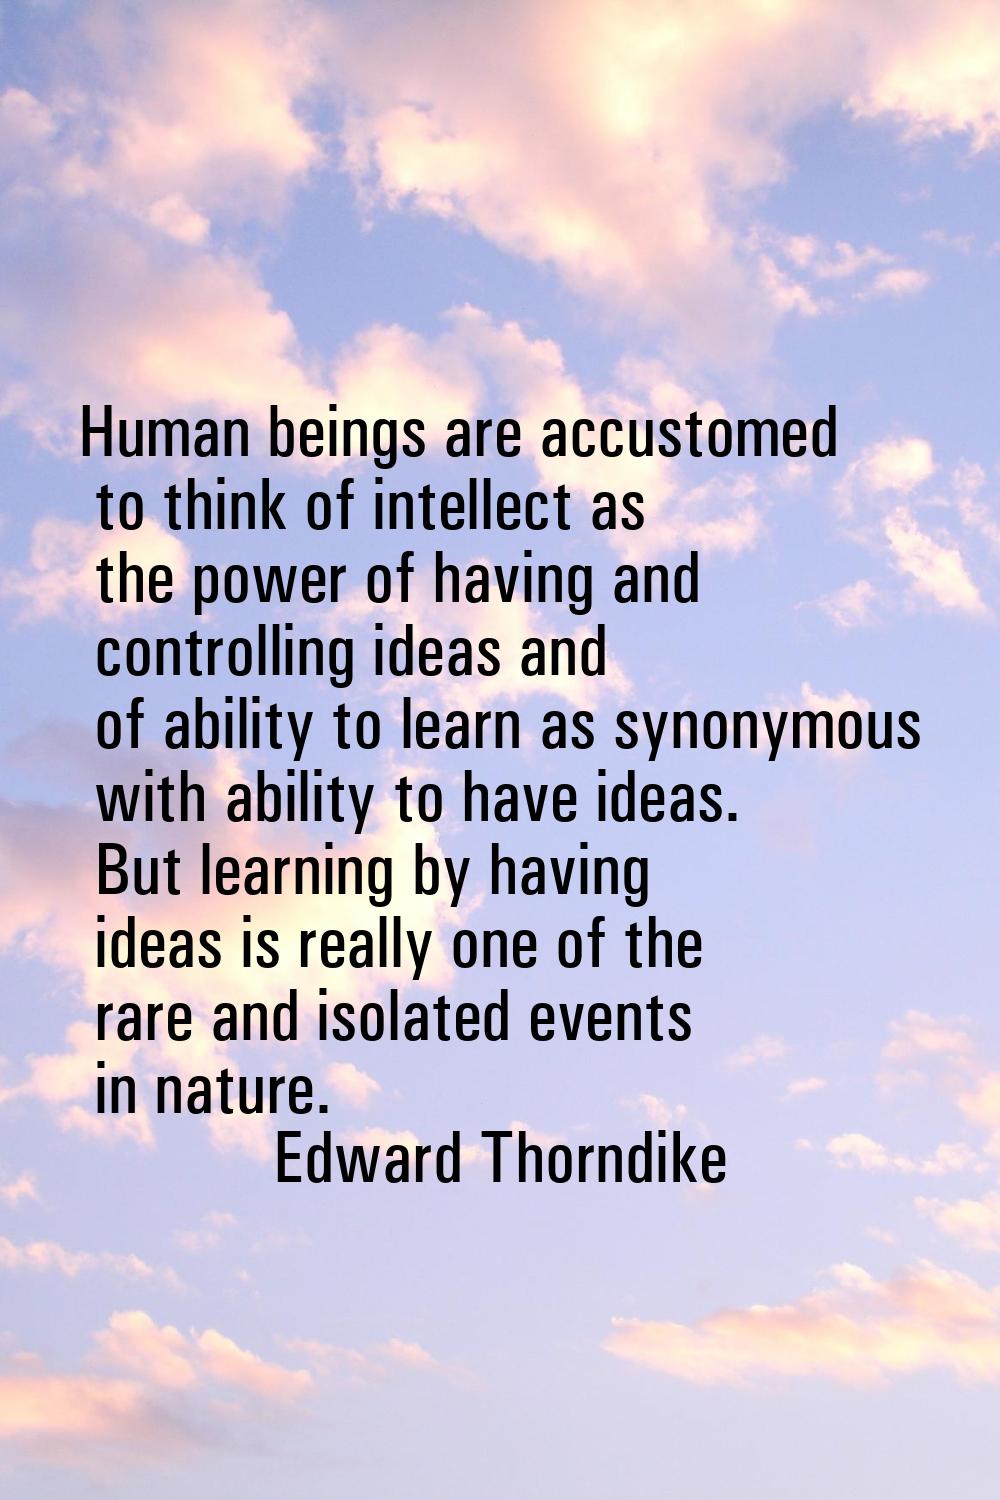 Human beings are accustomed to think of intellect as the power of having and controlling ideas and 